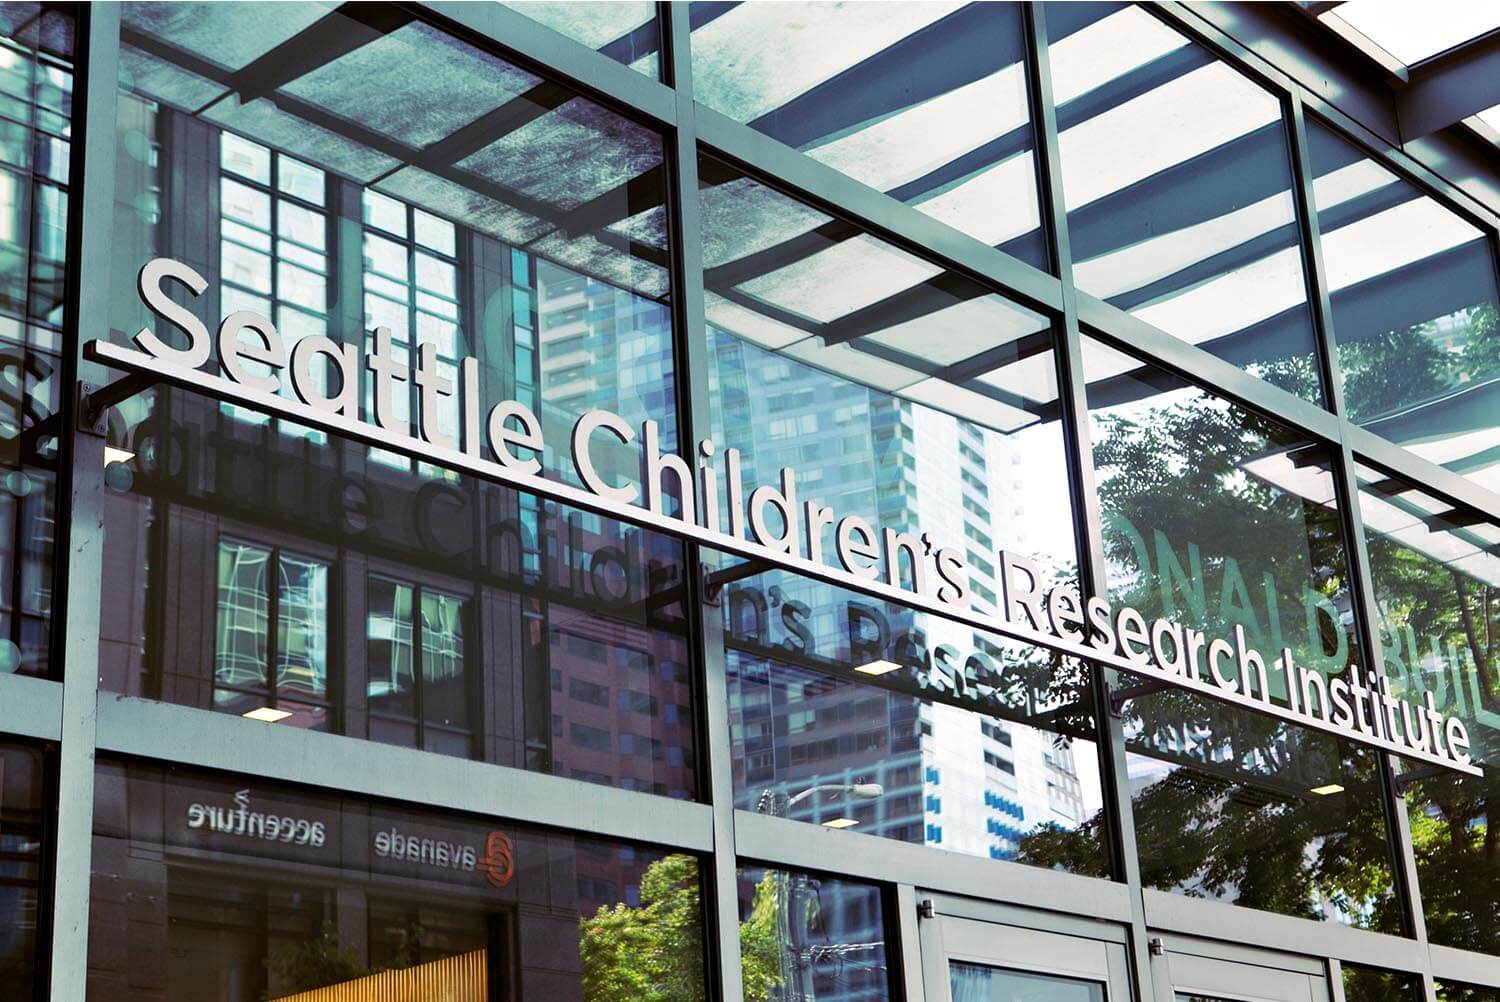 Seattle Childrens Research